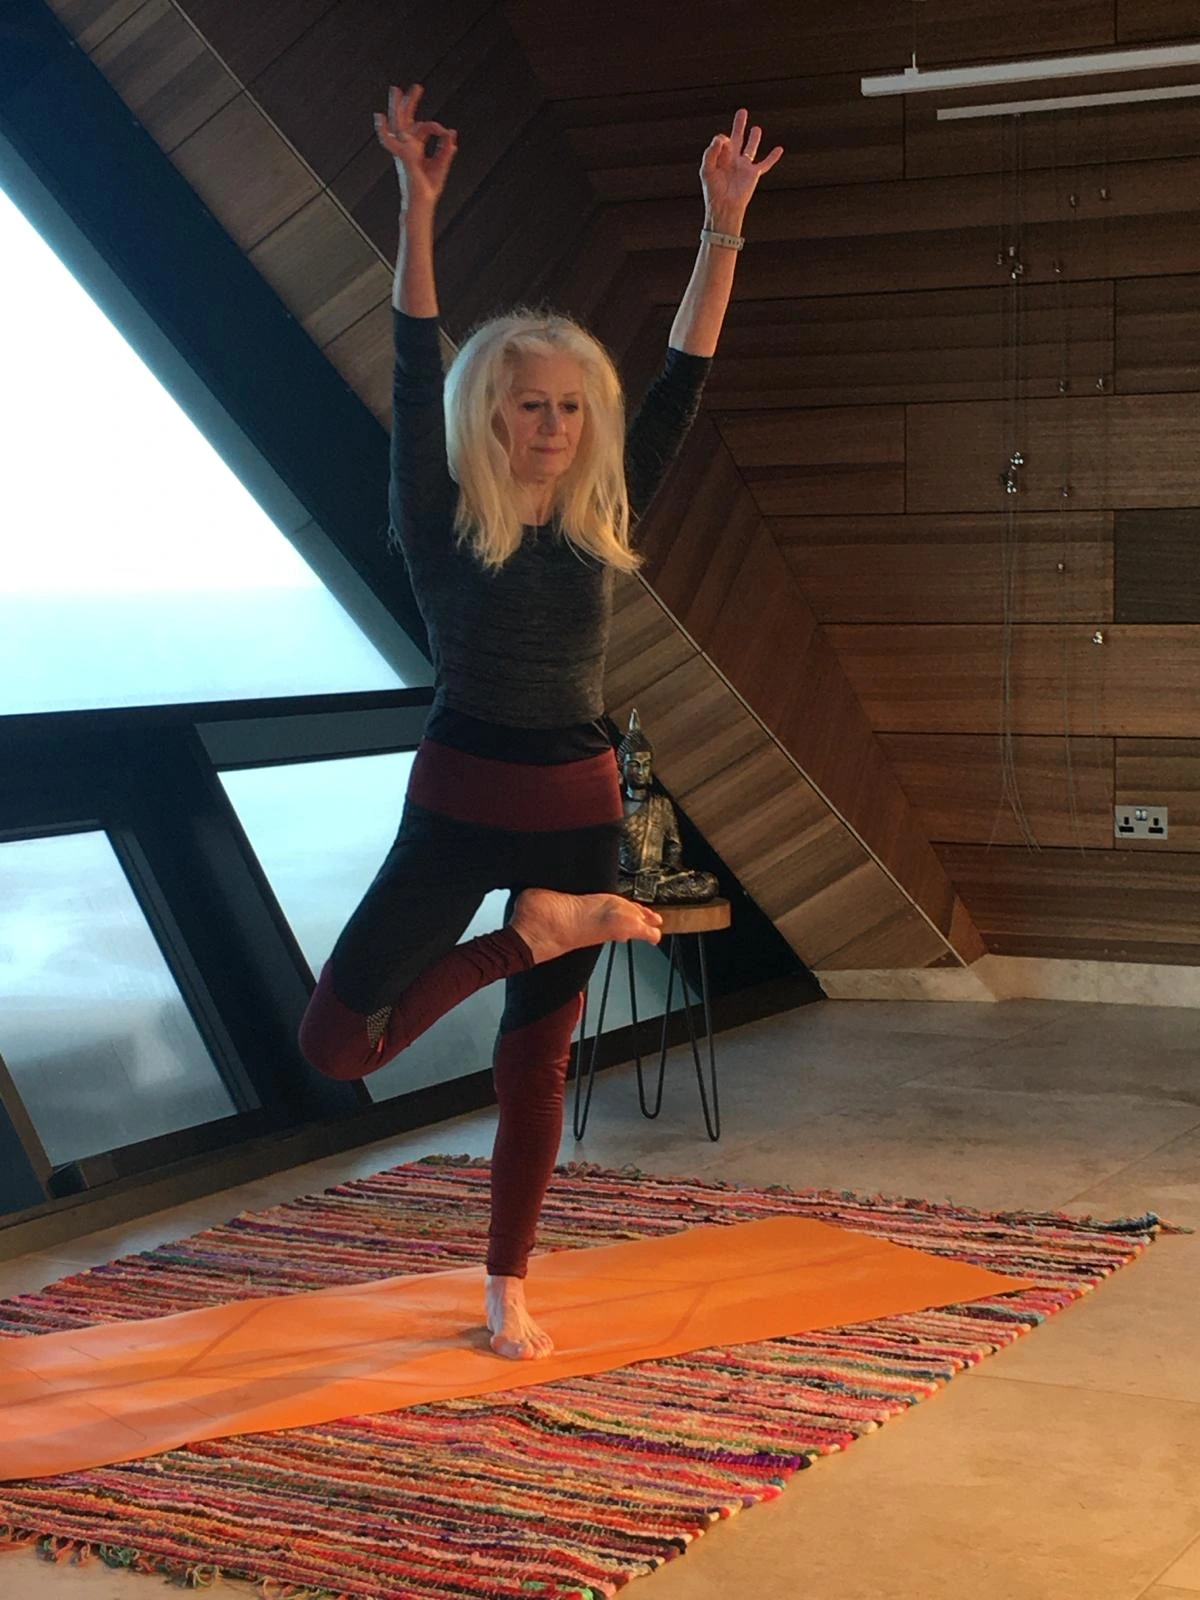 Irene Epsley of East Coast Yoga doing a standing yoga pose on a rug in front of a window at the North Sea Observatory